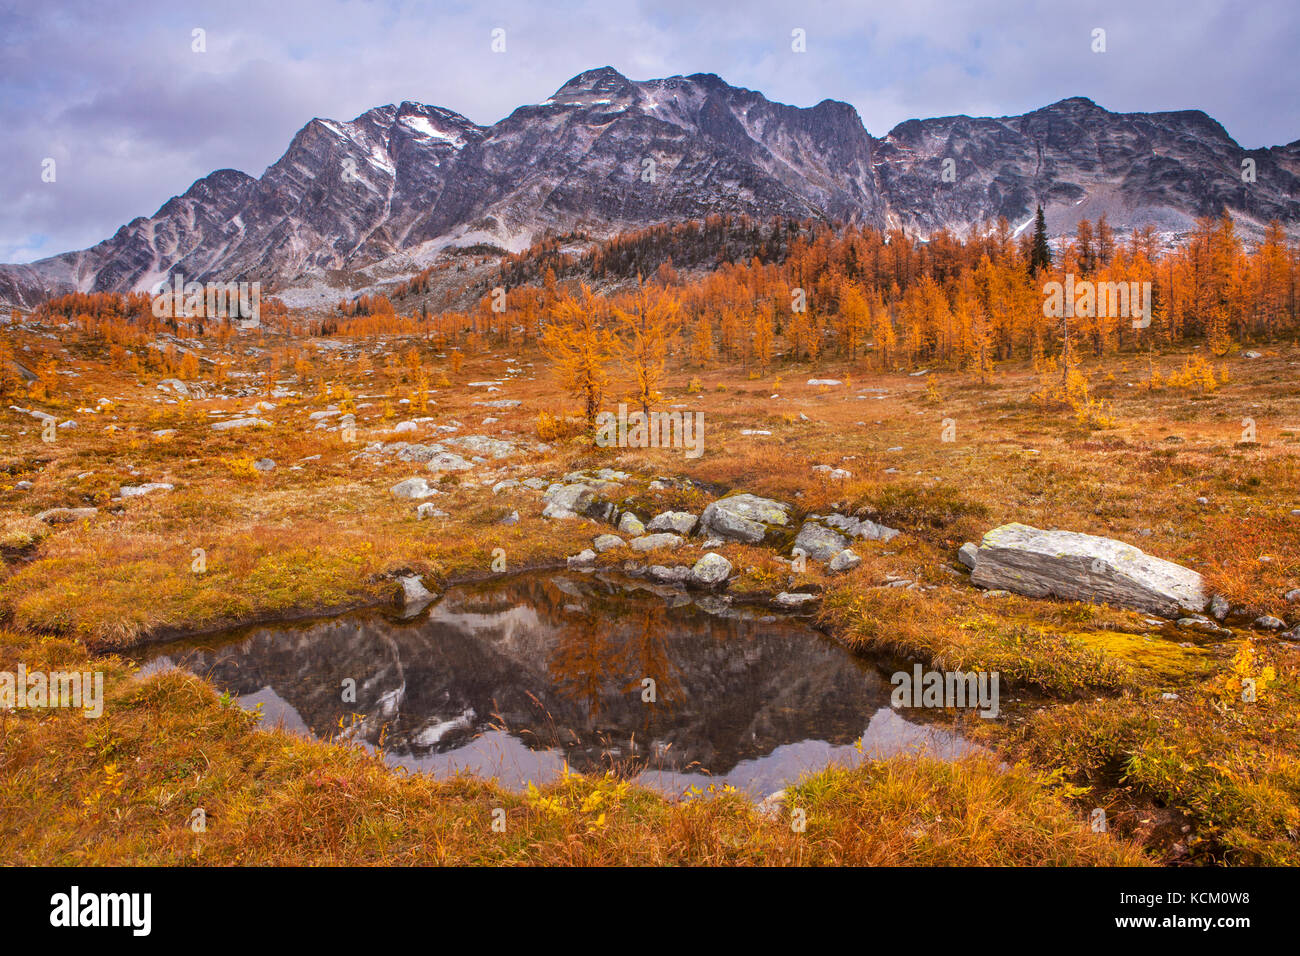 Mount Monica reflected in a tarn in Monica Meadows amidst fall larches, Purcell Mountains, British Columbia, Canada. Stock Photo